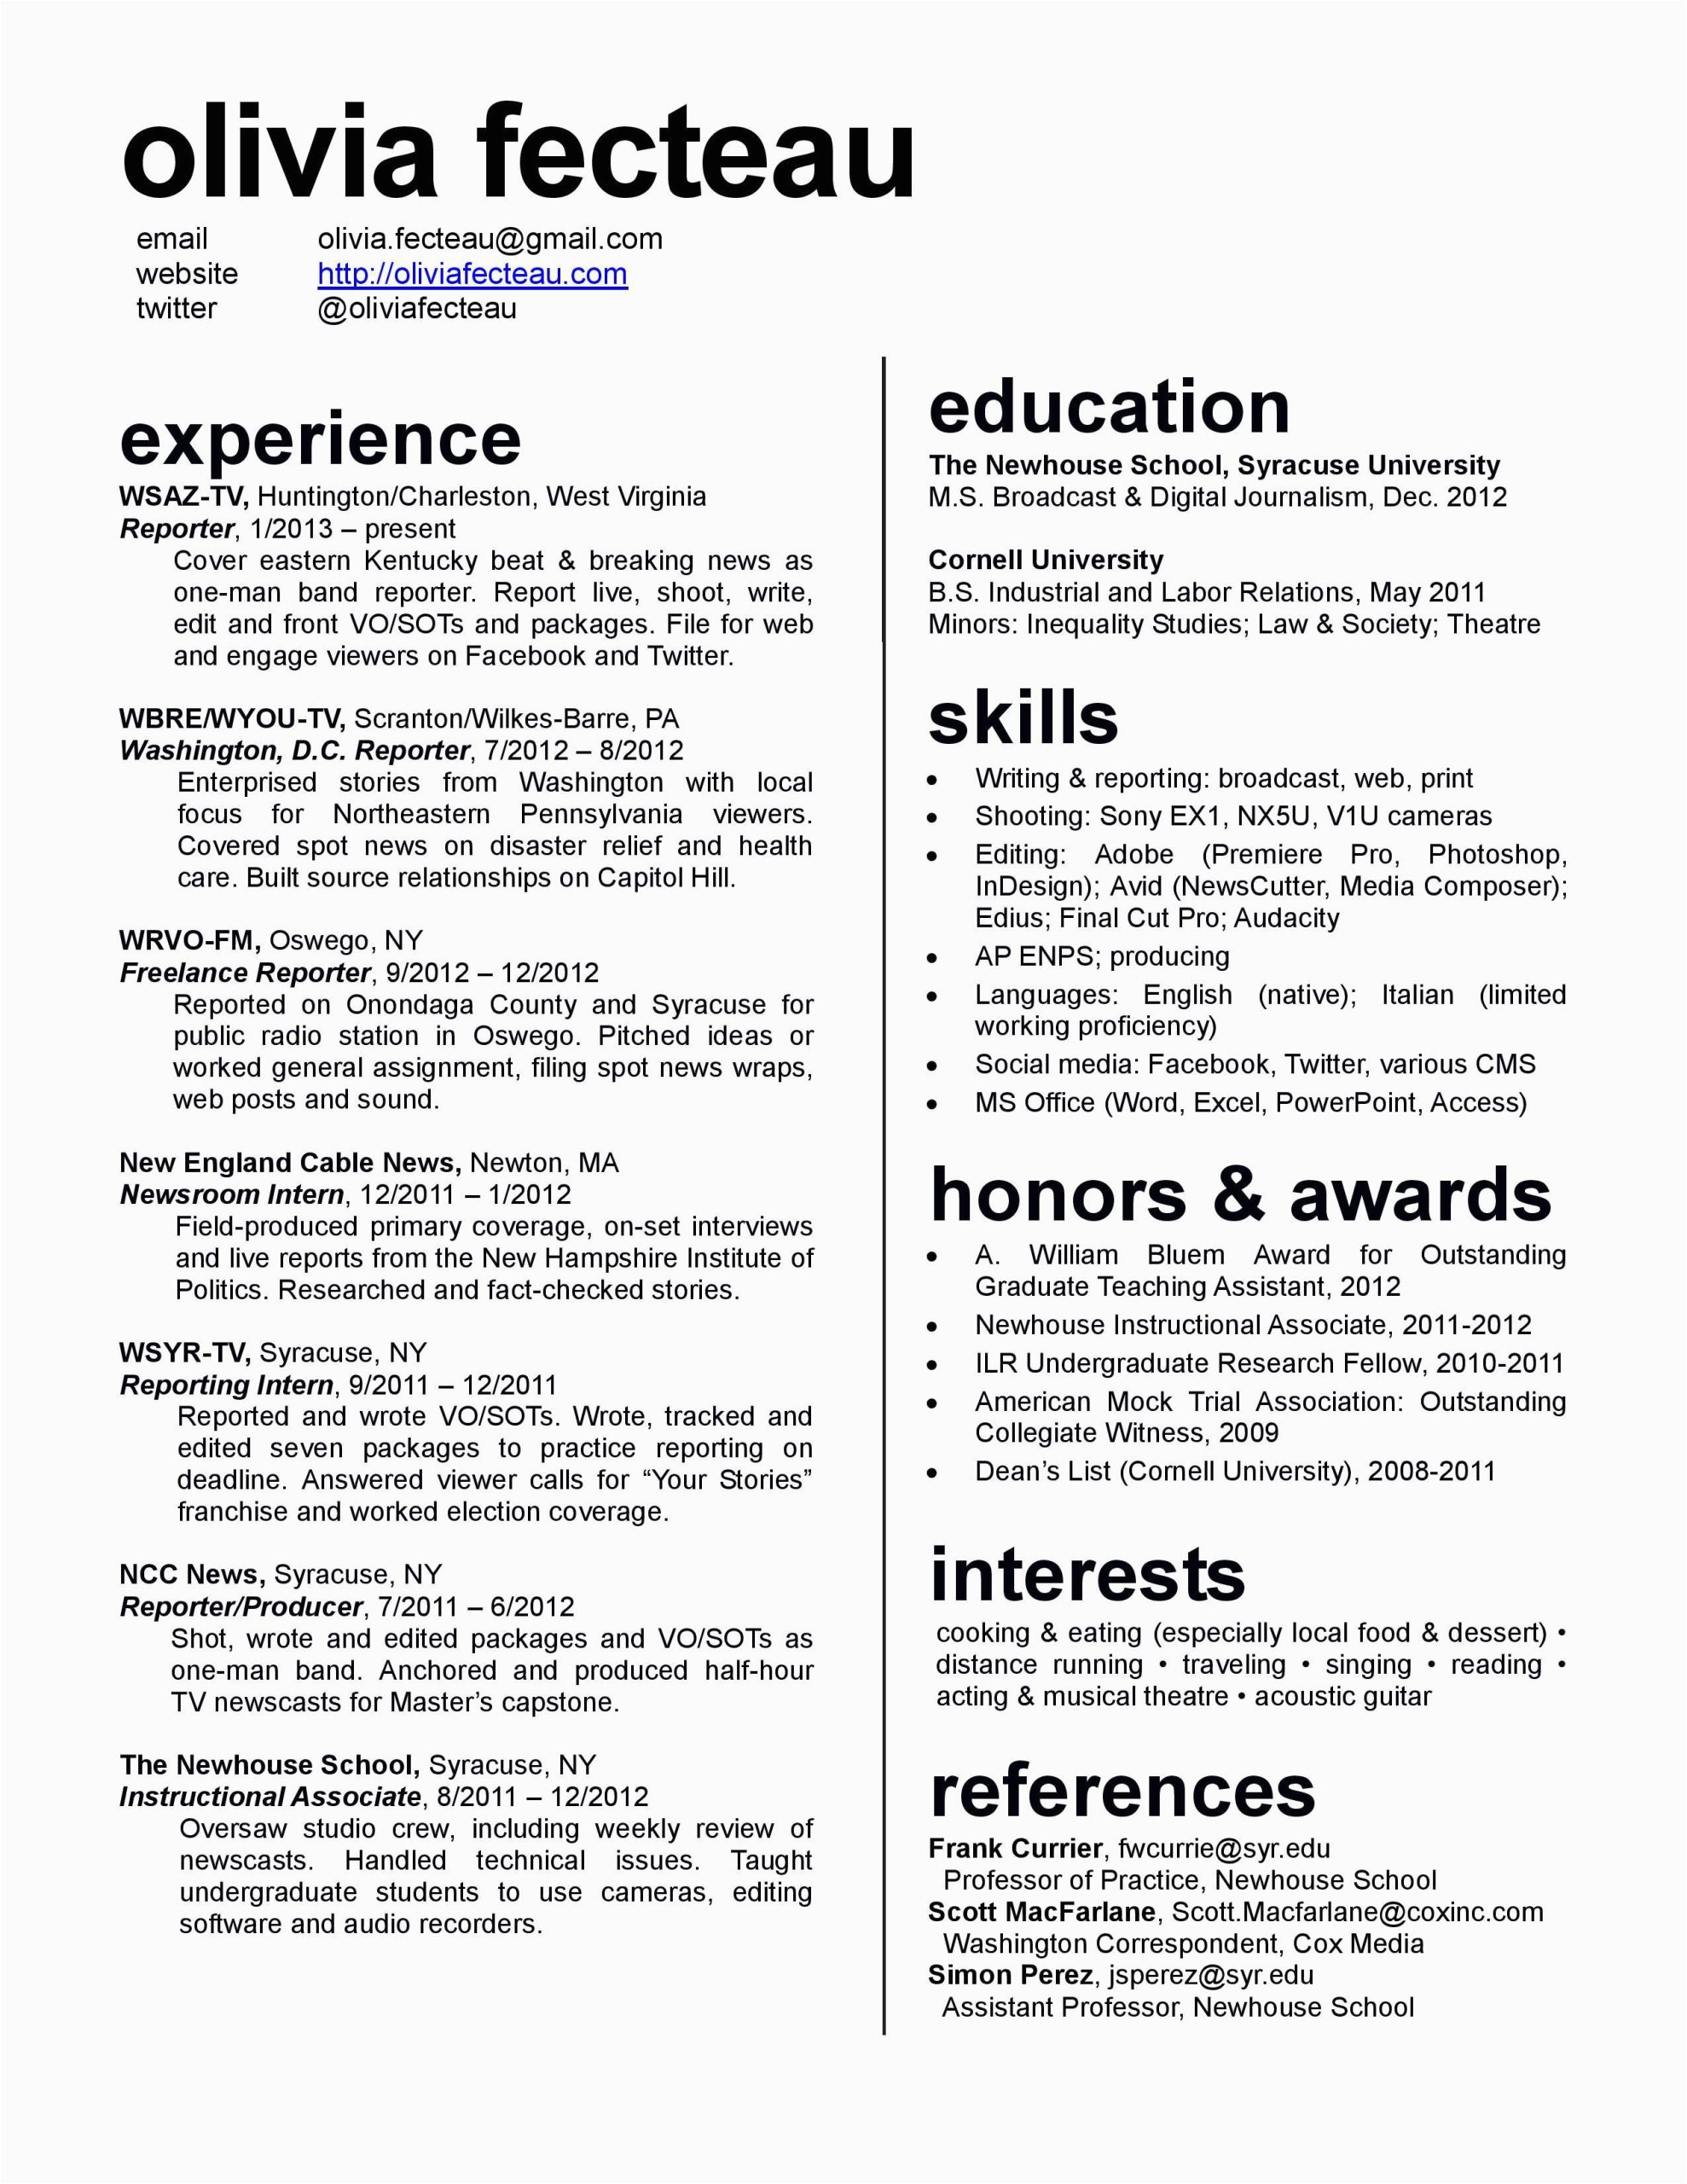 Sample Resume formats to Fit Alot Of Information How to Fit A Resume E Page Fitnessretro